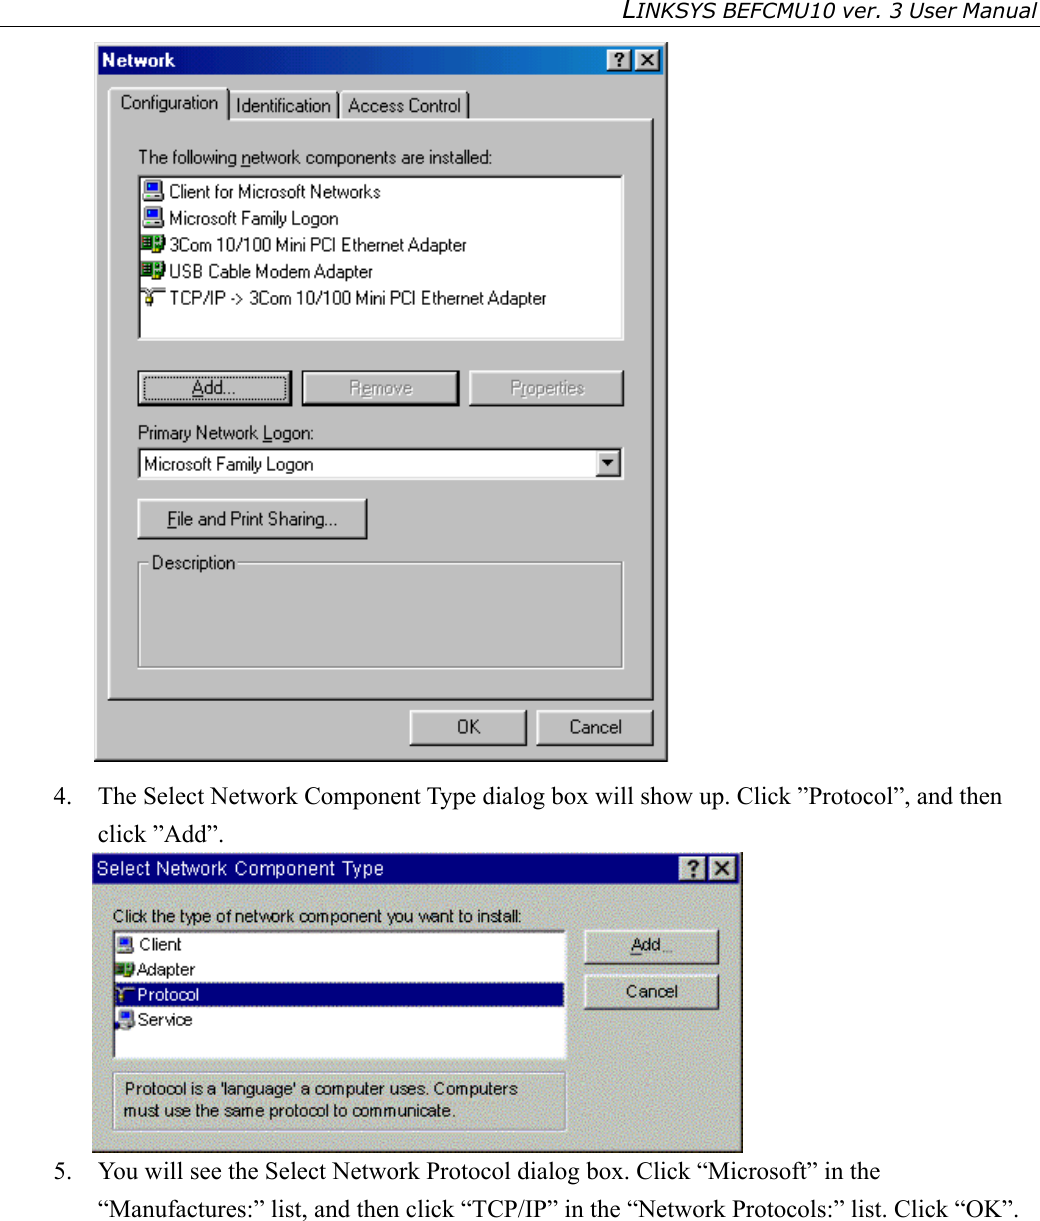 LINKSYS BEFCMU10 ver. 3 User Manual    4.  The Select Network Component Type dialog box will show up. Click ”Protocol”, and then click ”Add”.  5.  You will see the Select Network Protocol dialog box. Click “Microsoft” in the “Manufactures:” list, and then click “TCP/IP” in the “Network Protocols:” list. Click “OK”. 